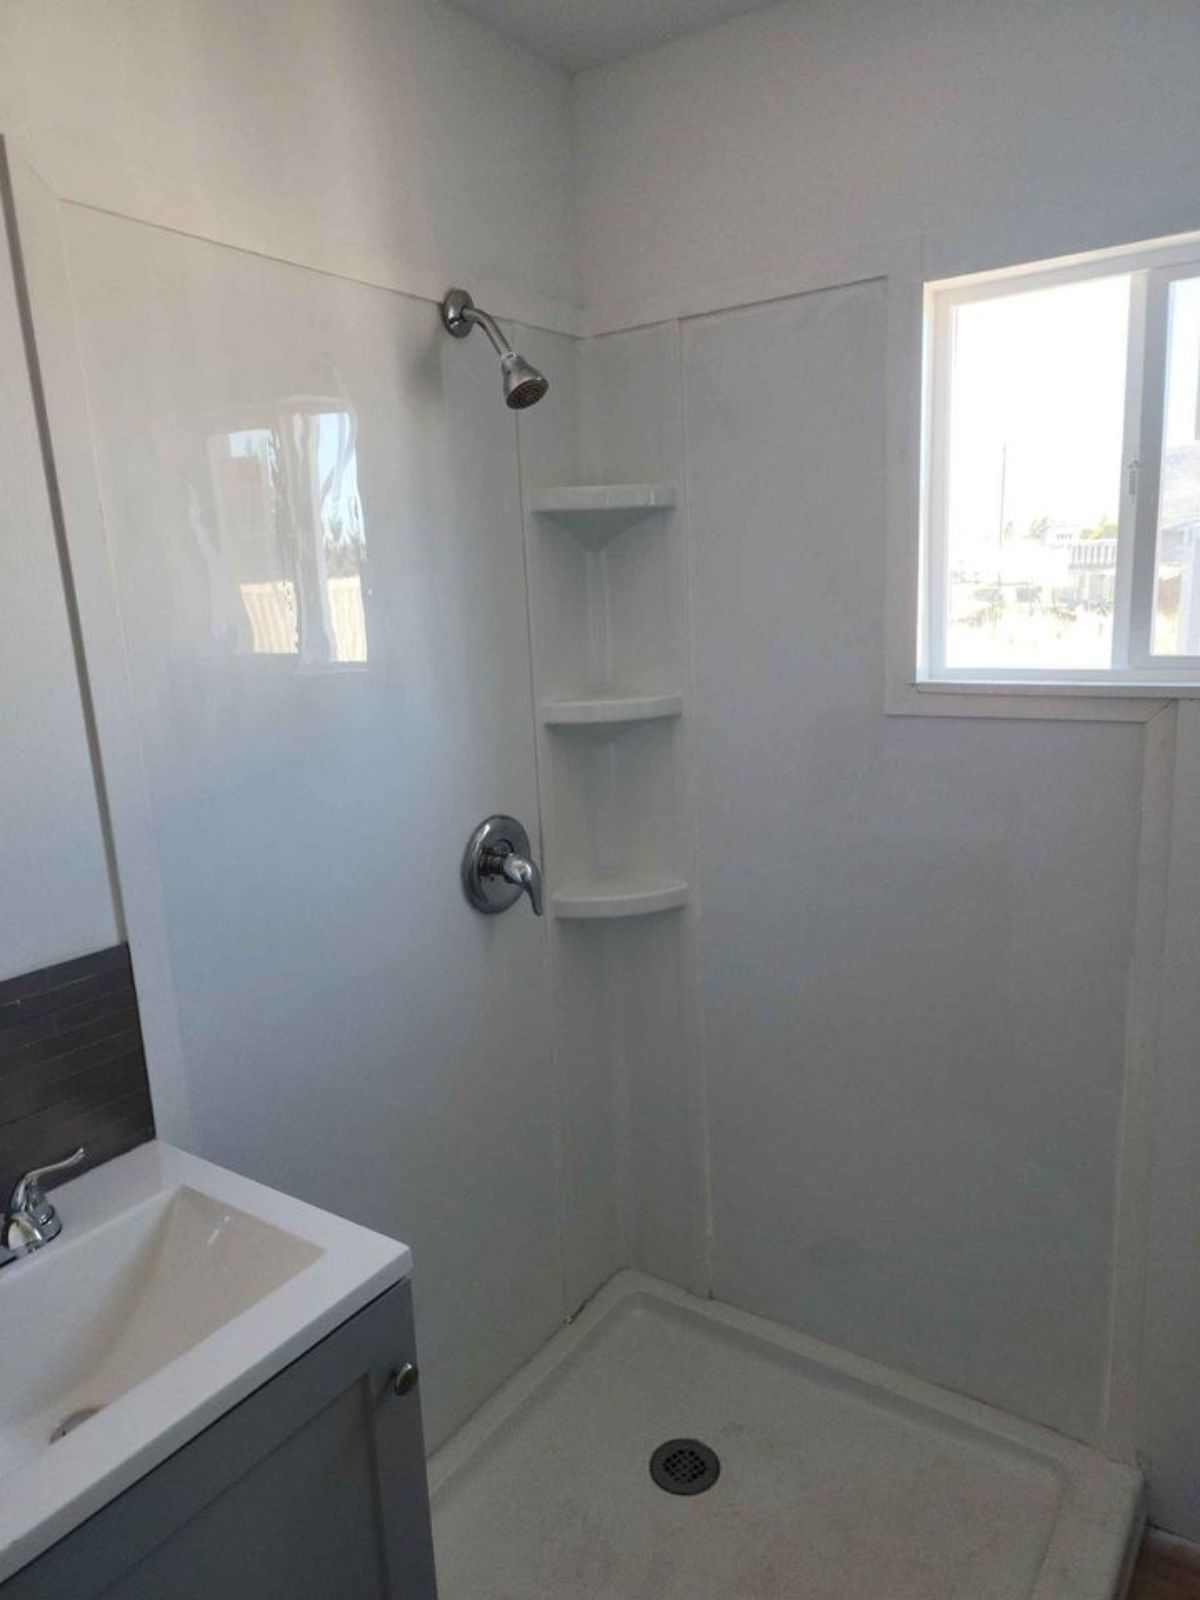 Bathroom of 40' shipping container home is attached to the bedroom makes it a master bedroom